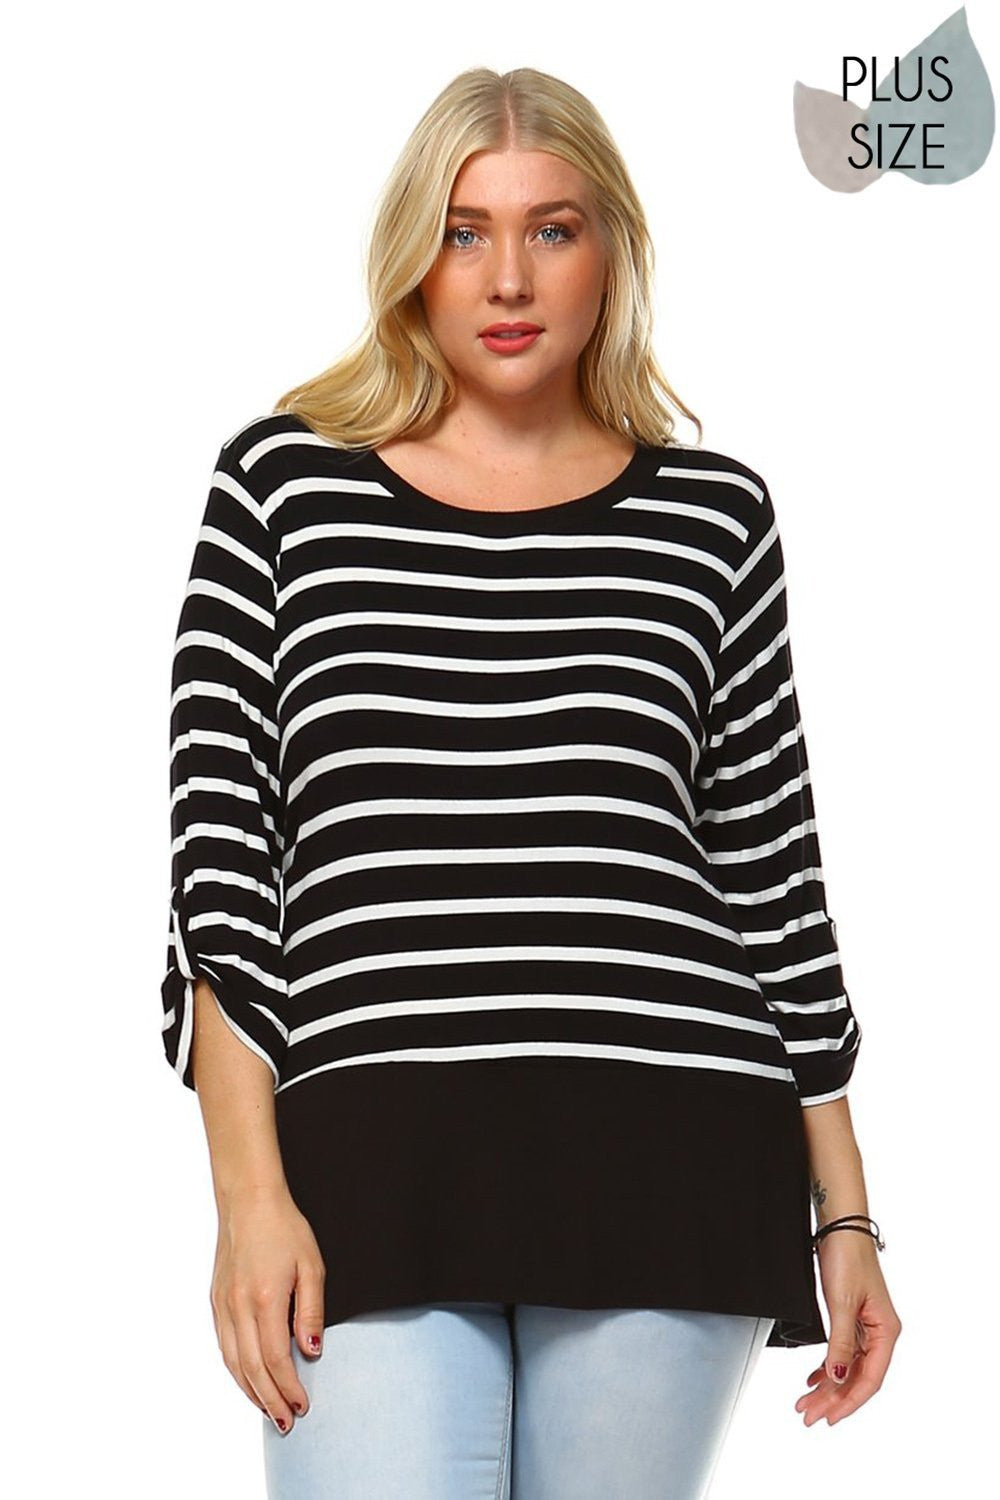 beautiful woman wearing a Striped Fold-over 3/4 Sleeve top with button Perfect for any activity,relaxing day,beautiful and unique,comfortable and flattering